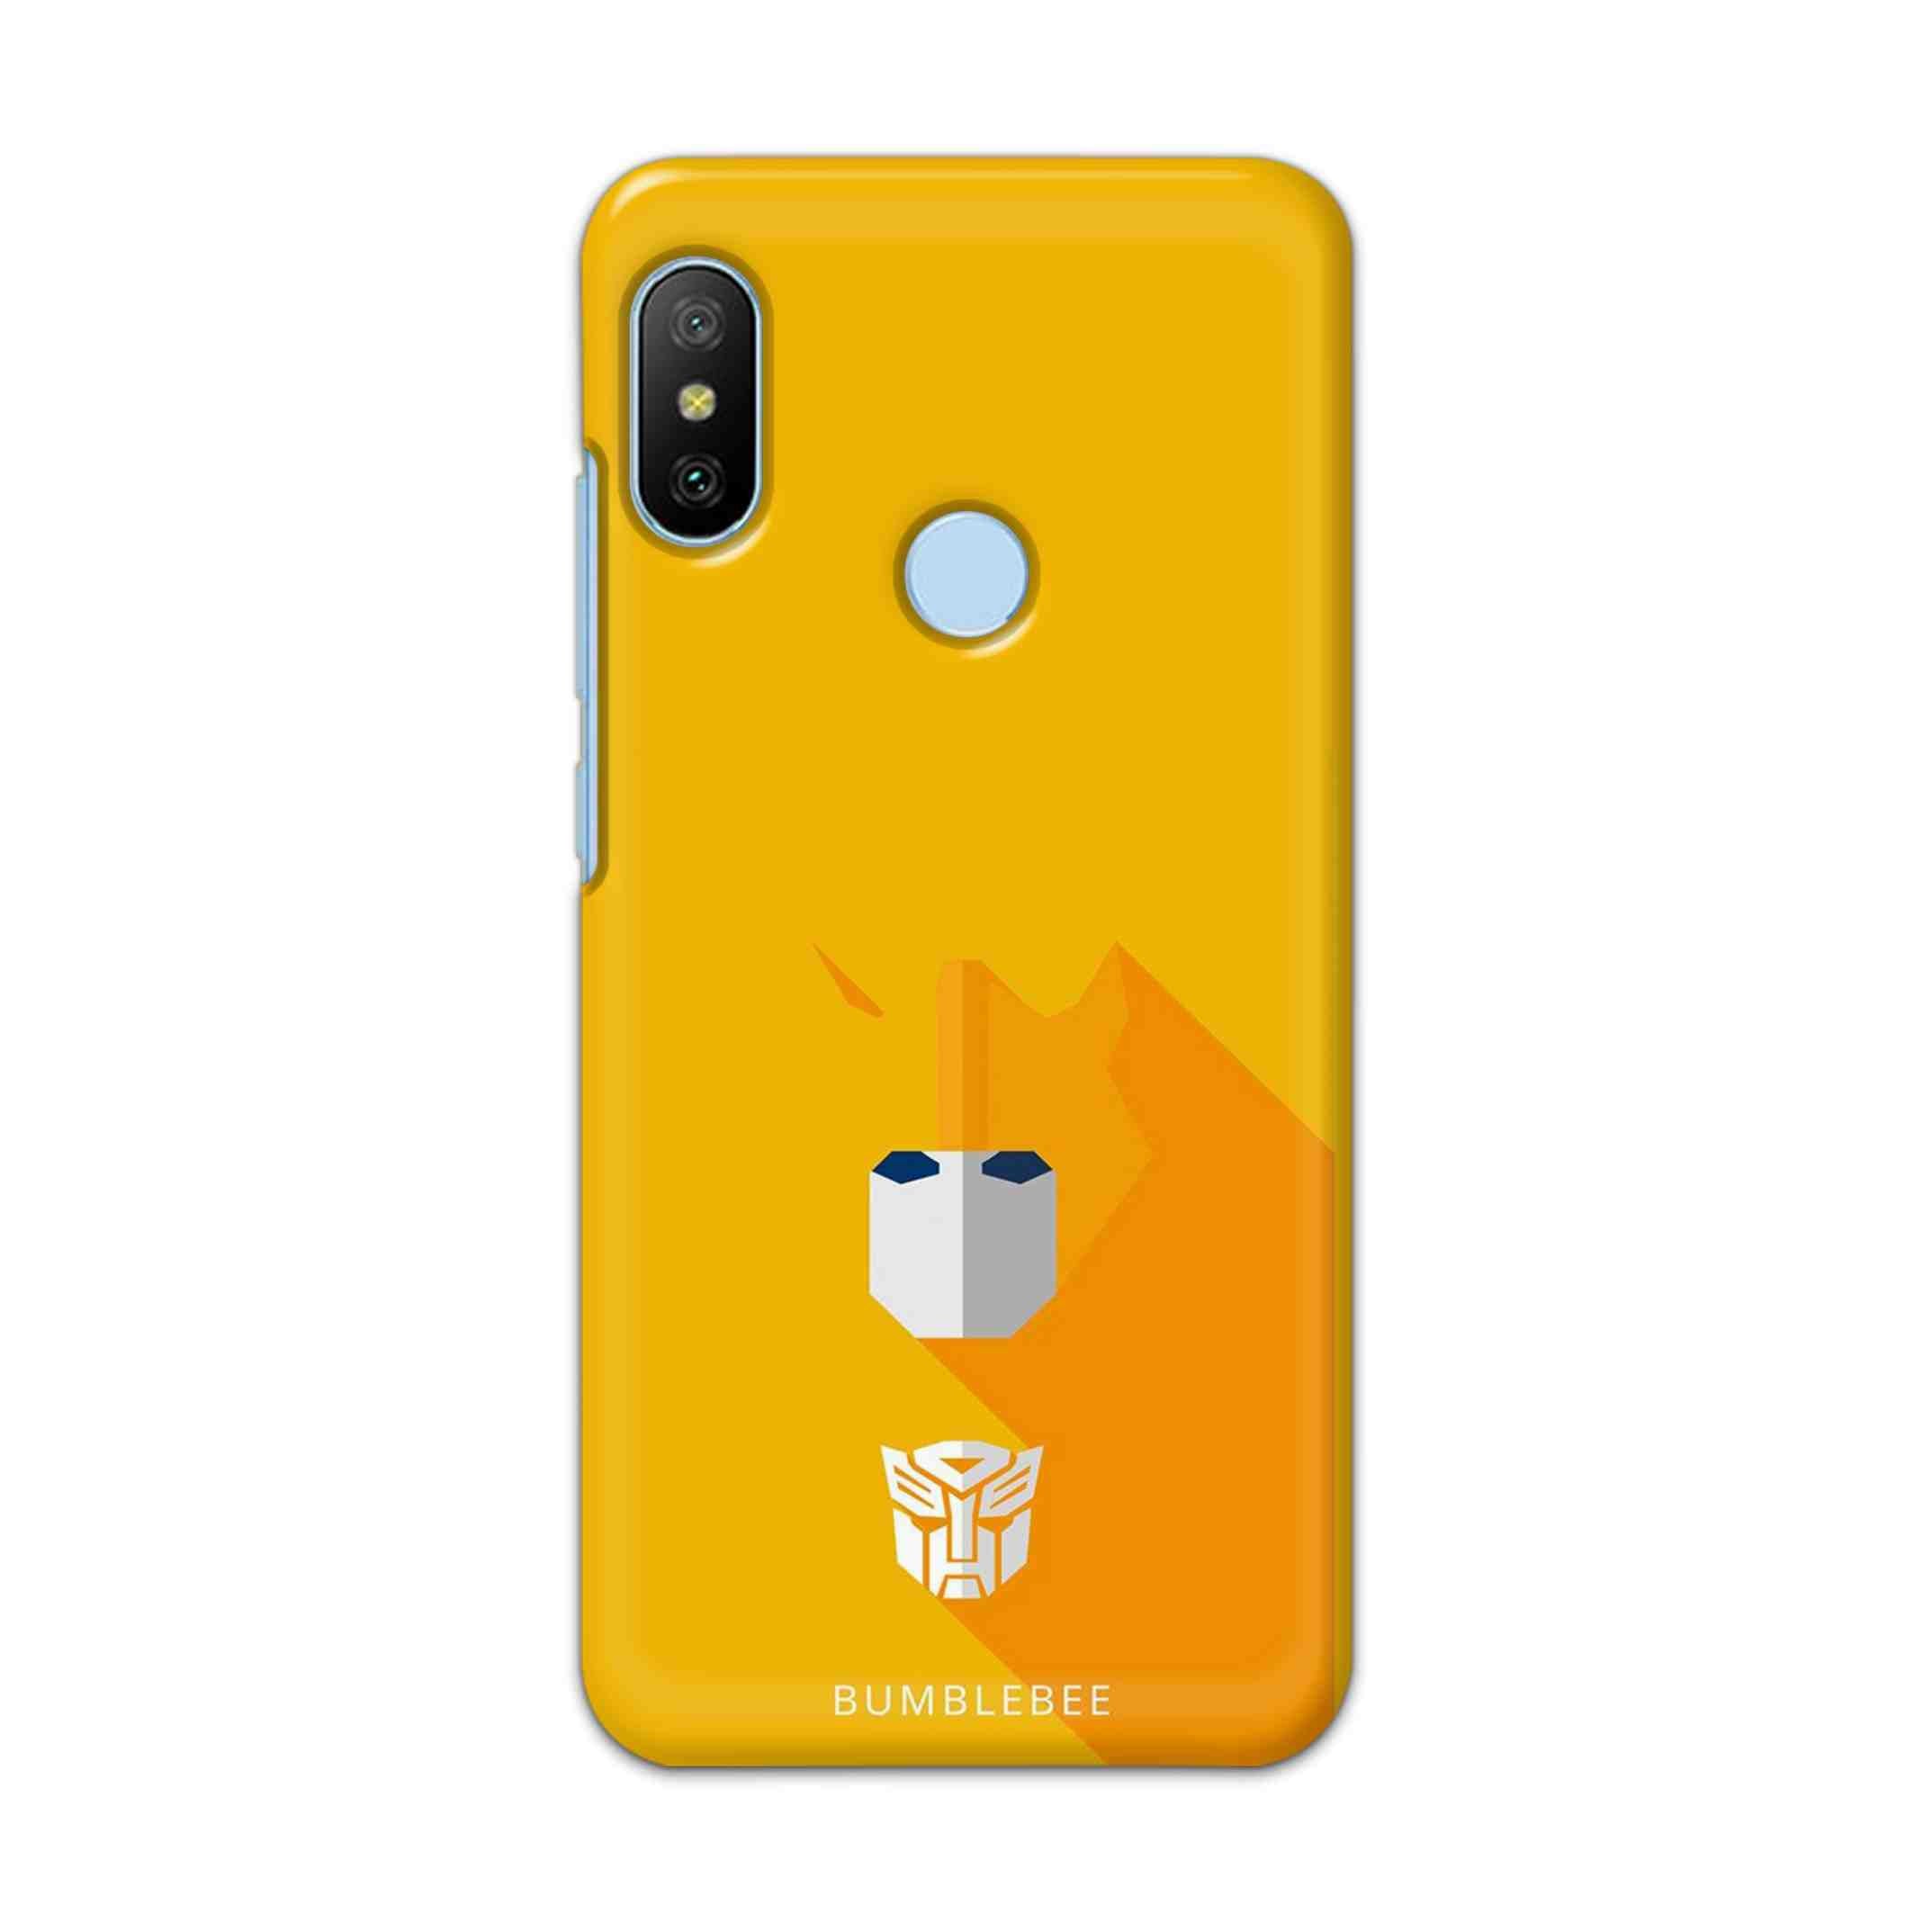 Buy Transformer Hard Back Mobile Phone Case/Cover For Xiaomi Redmi 6 Pro Online